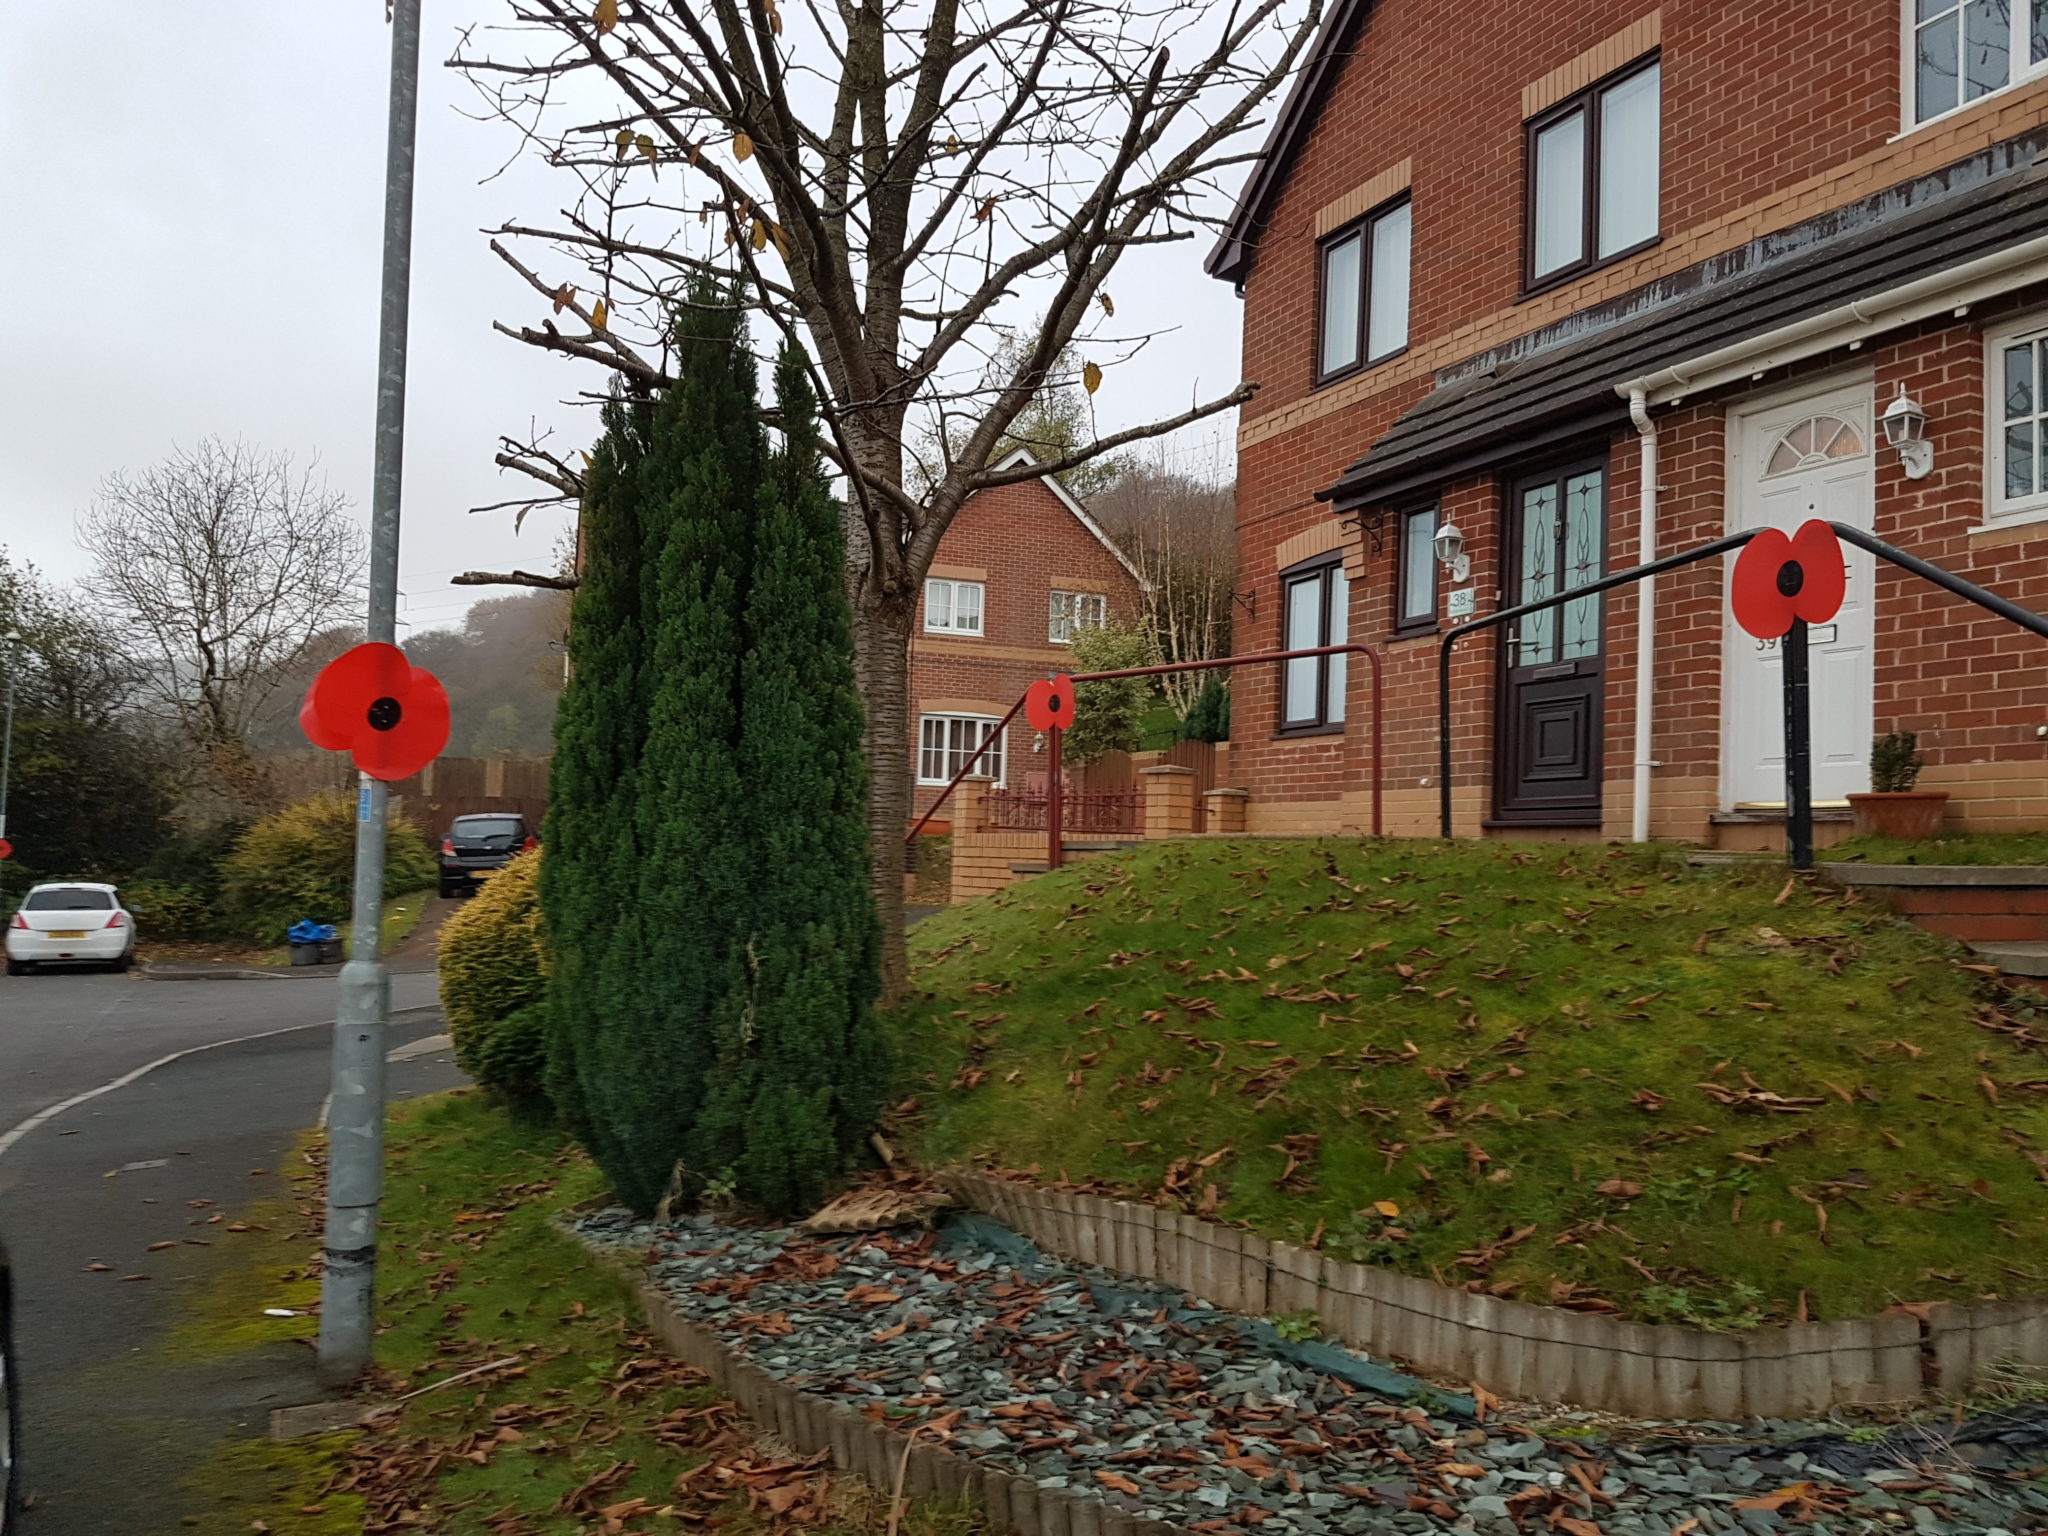 Poppies have been put on lampposts in Rosemead in Cwmbran